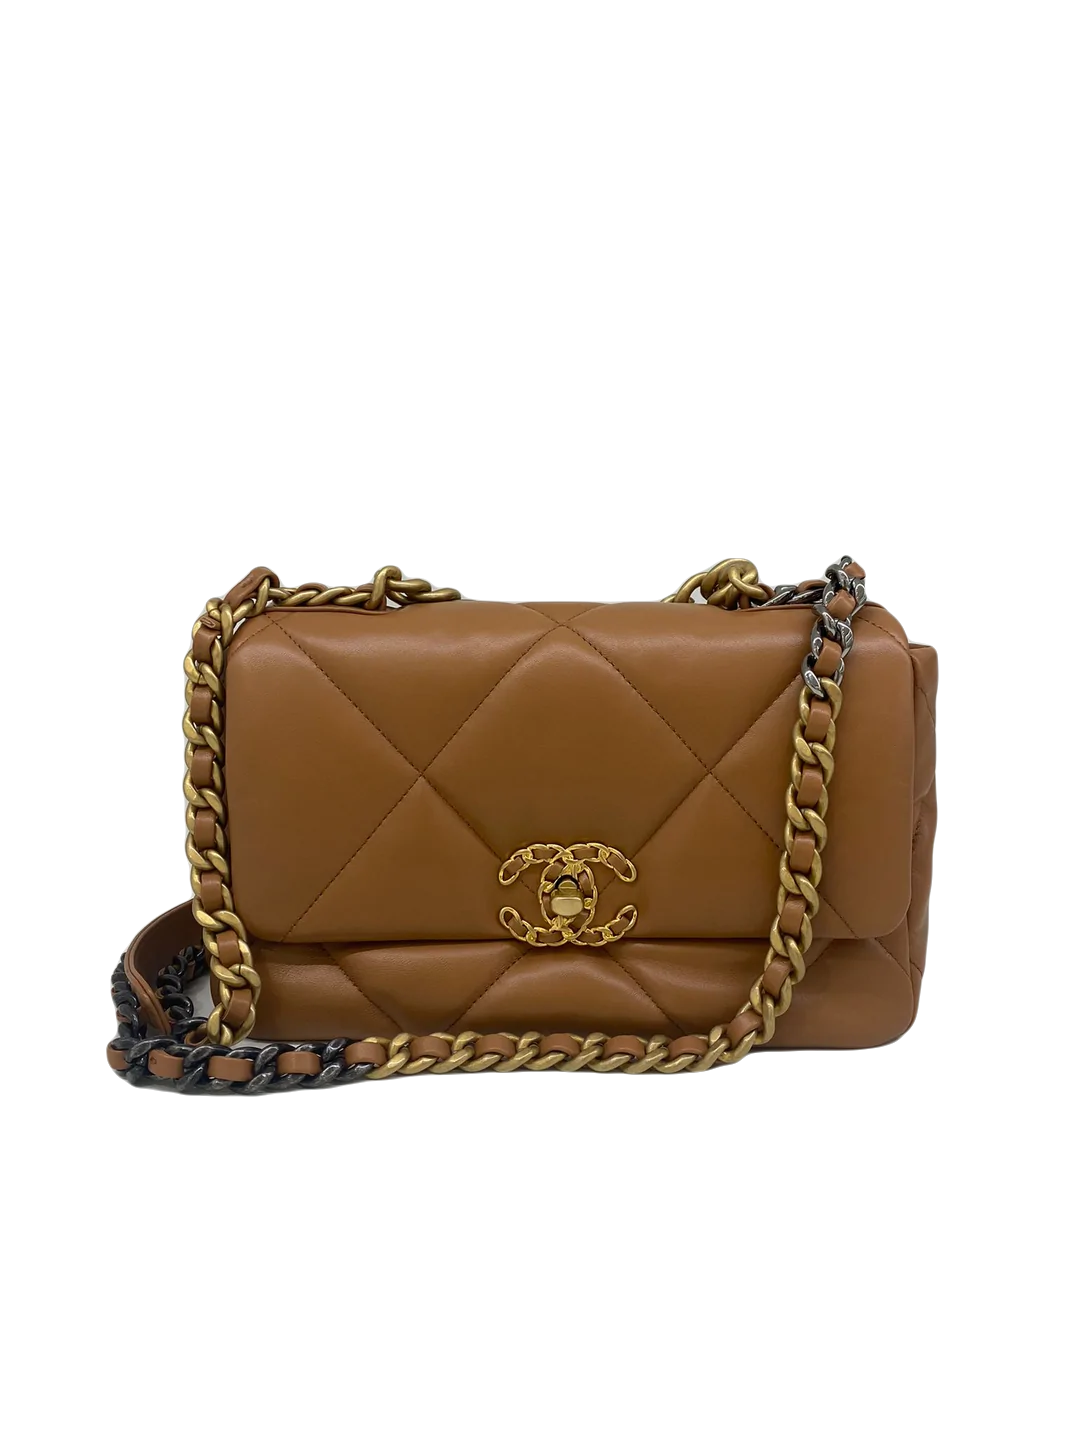 Chanel 19 Small Bag - Caramel - SOLD